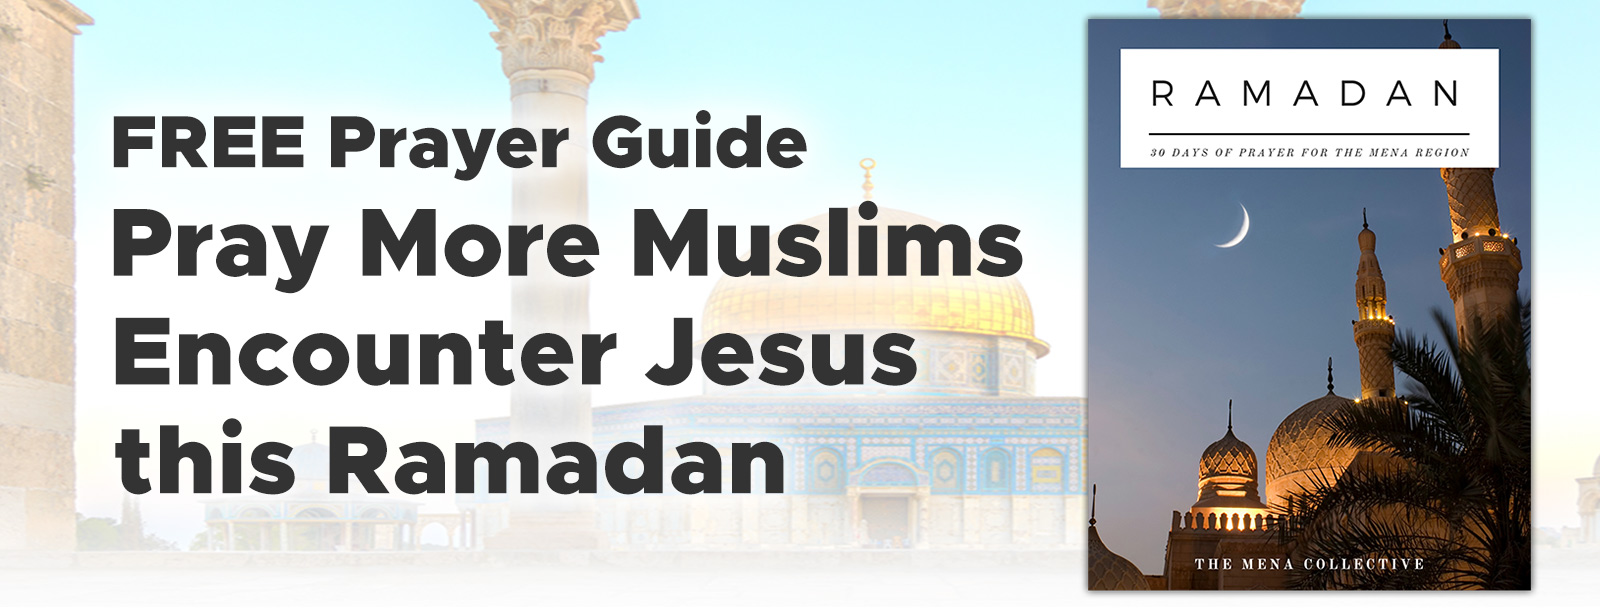 FREE Prayer Guide | Pray for 30 Cities in 30 Days